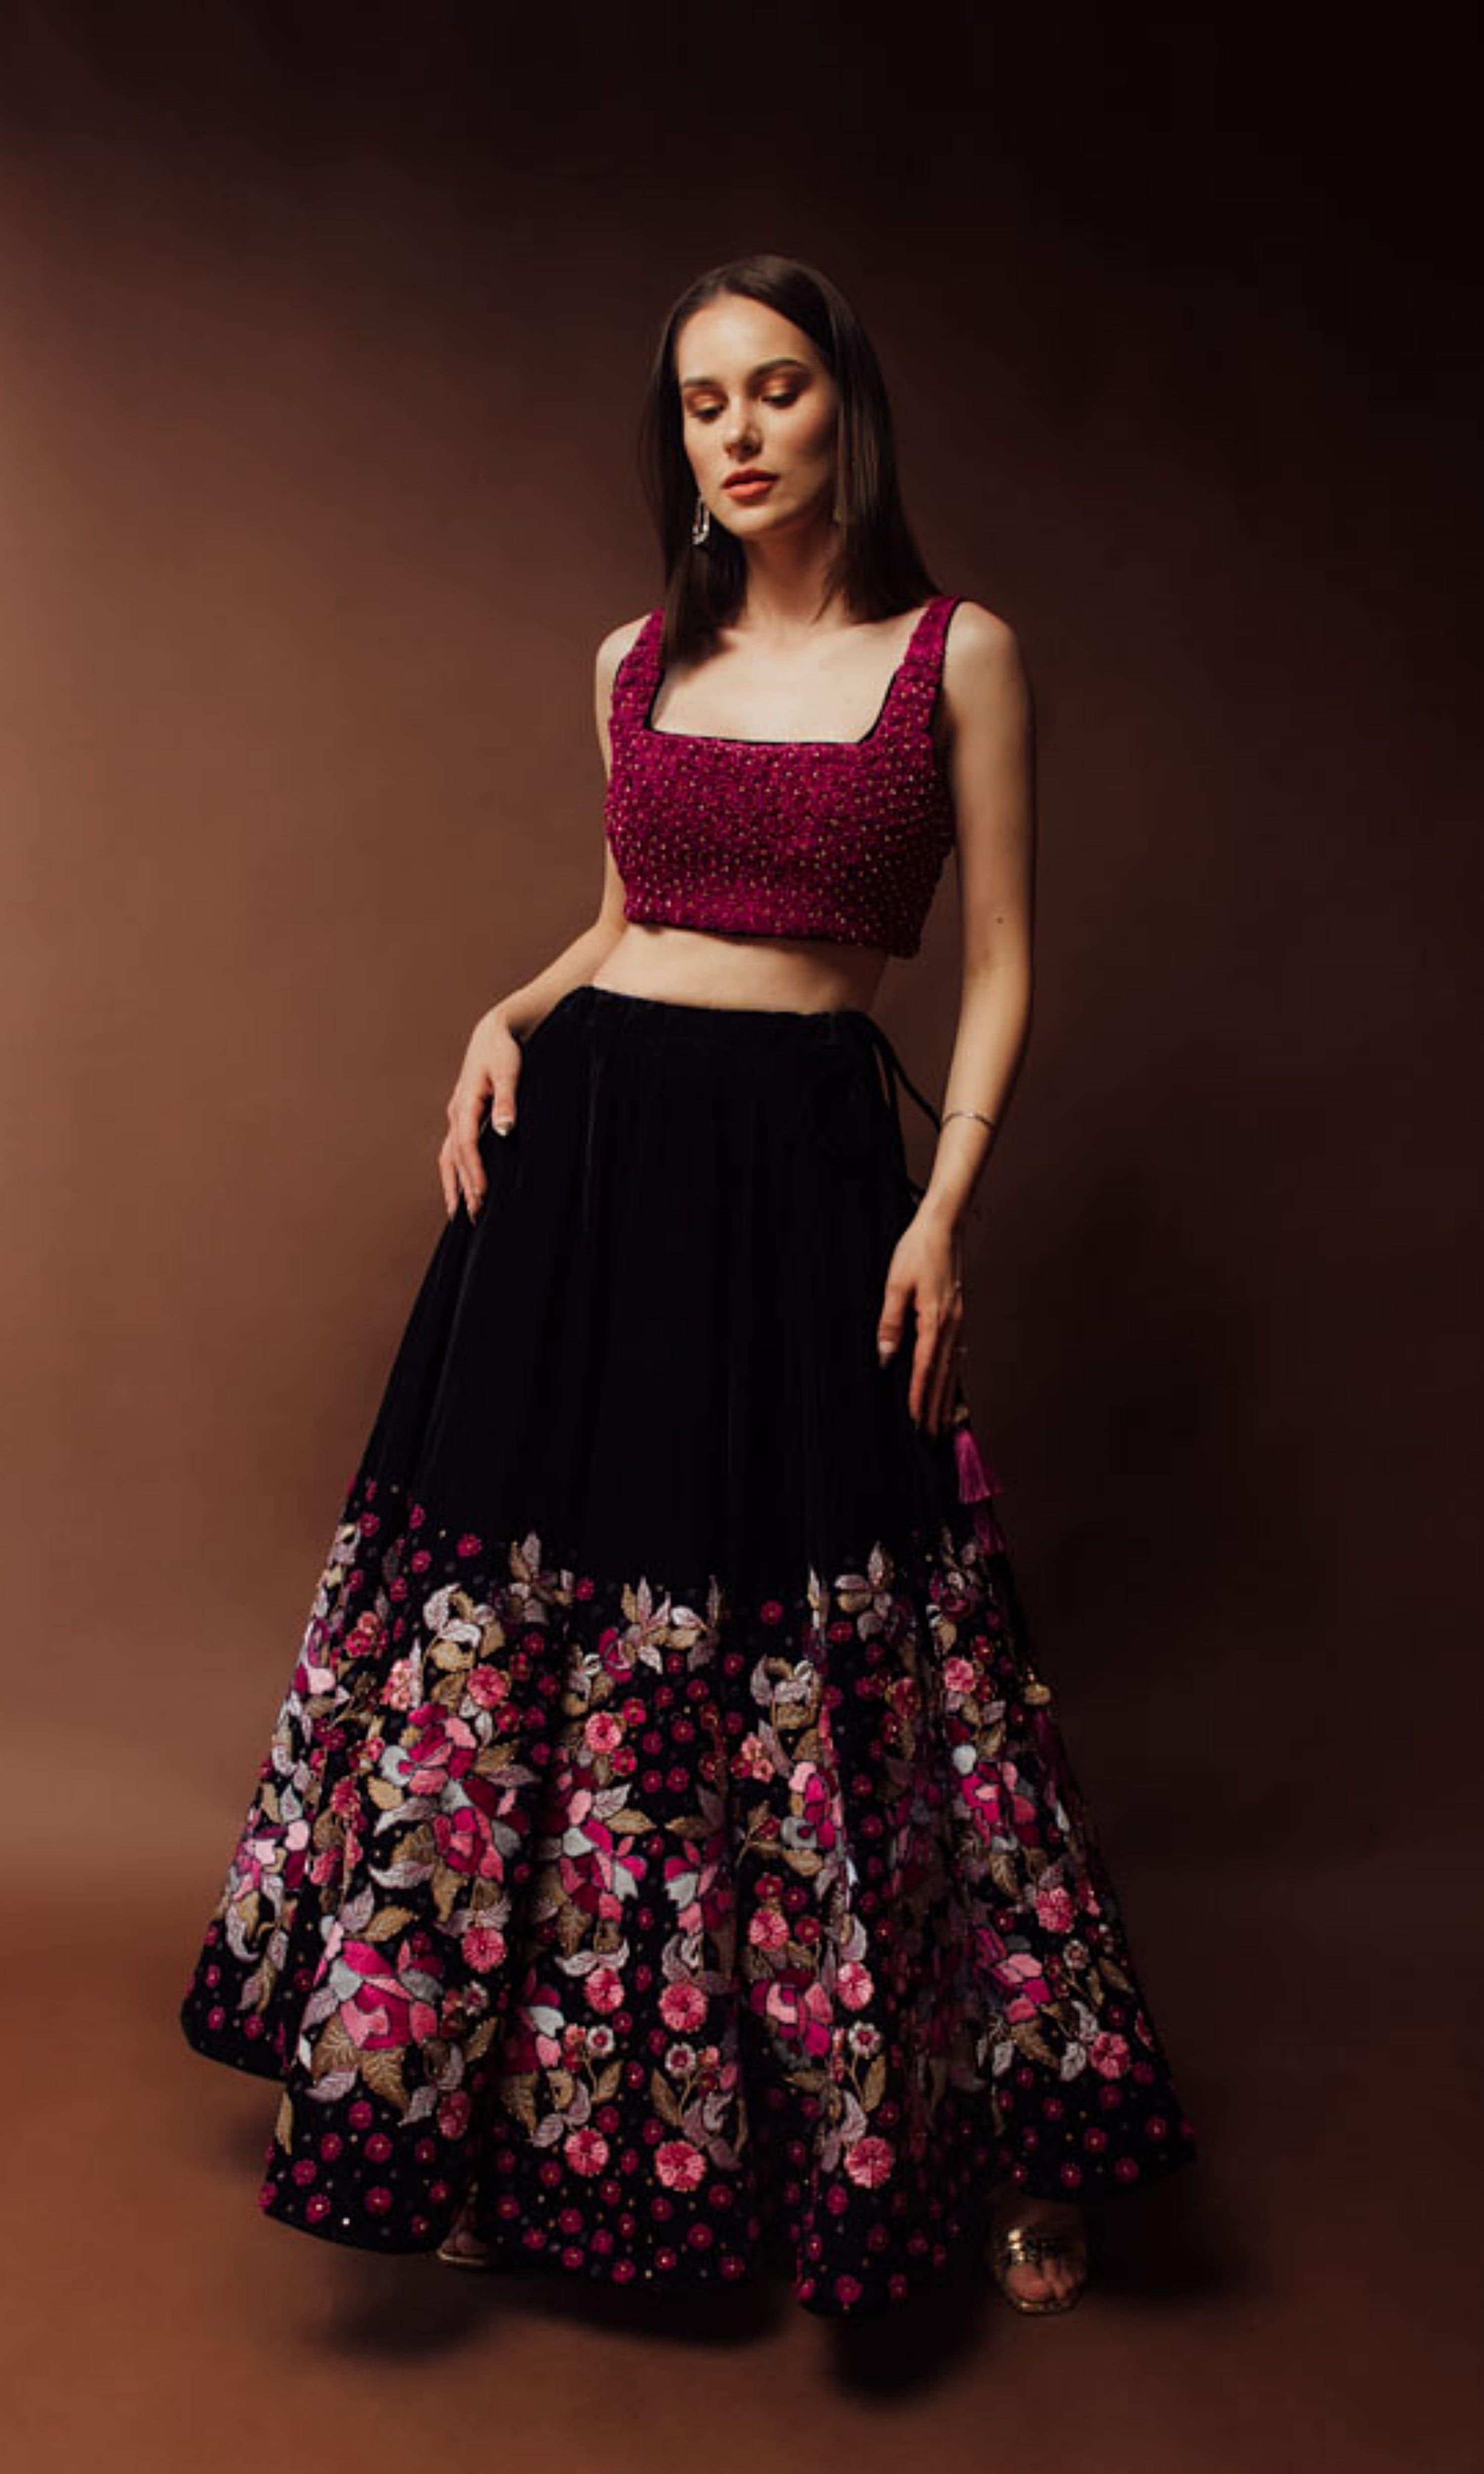 pink lehenga and black blouse | Indian attire, Indian outfits, India fashion